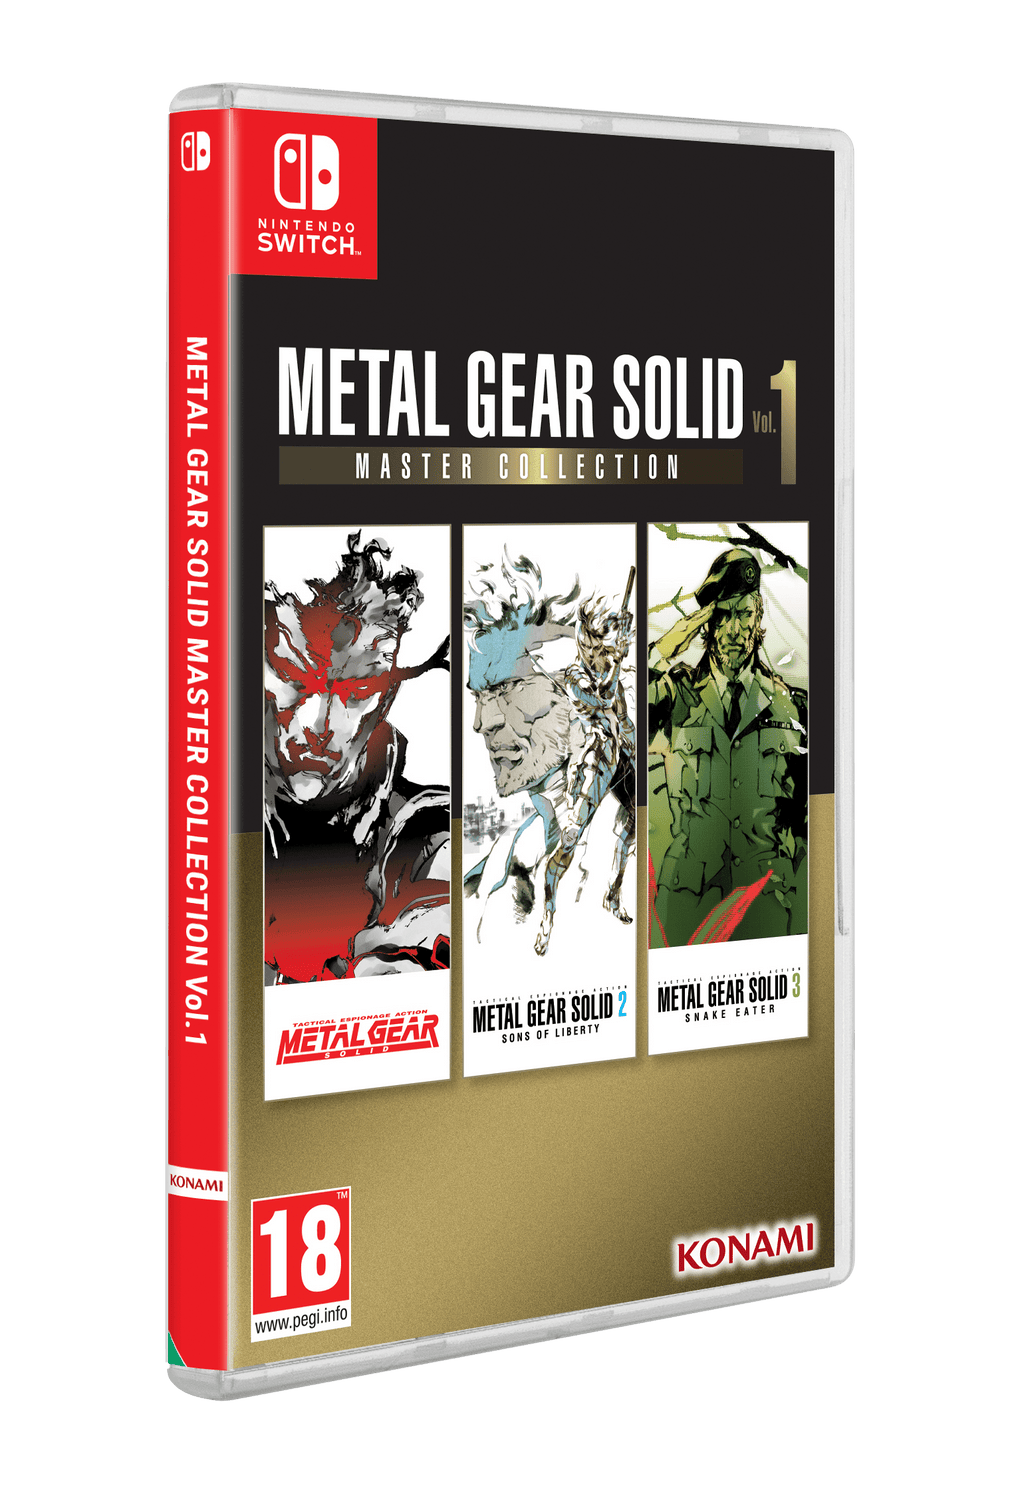 Metal Gear Solid: Master Collection Vol. 1 Reviews - OpenCritic